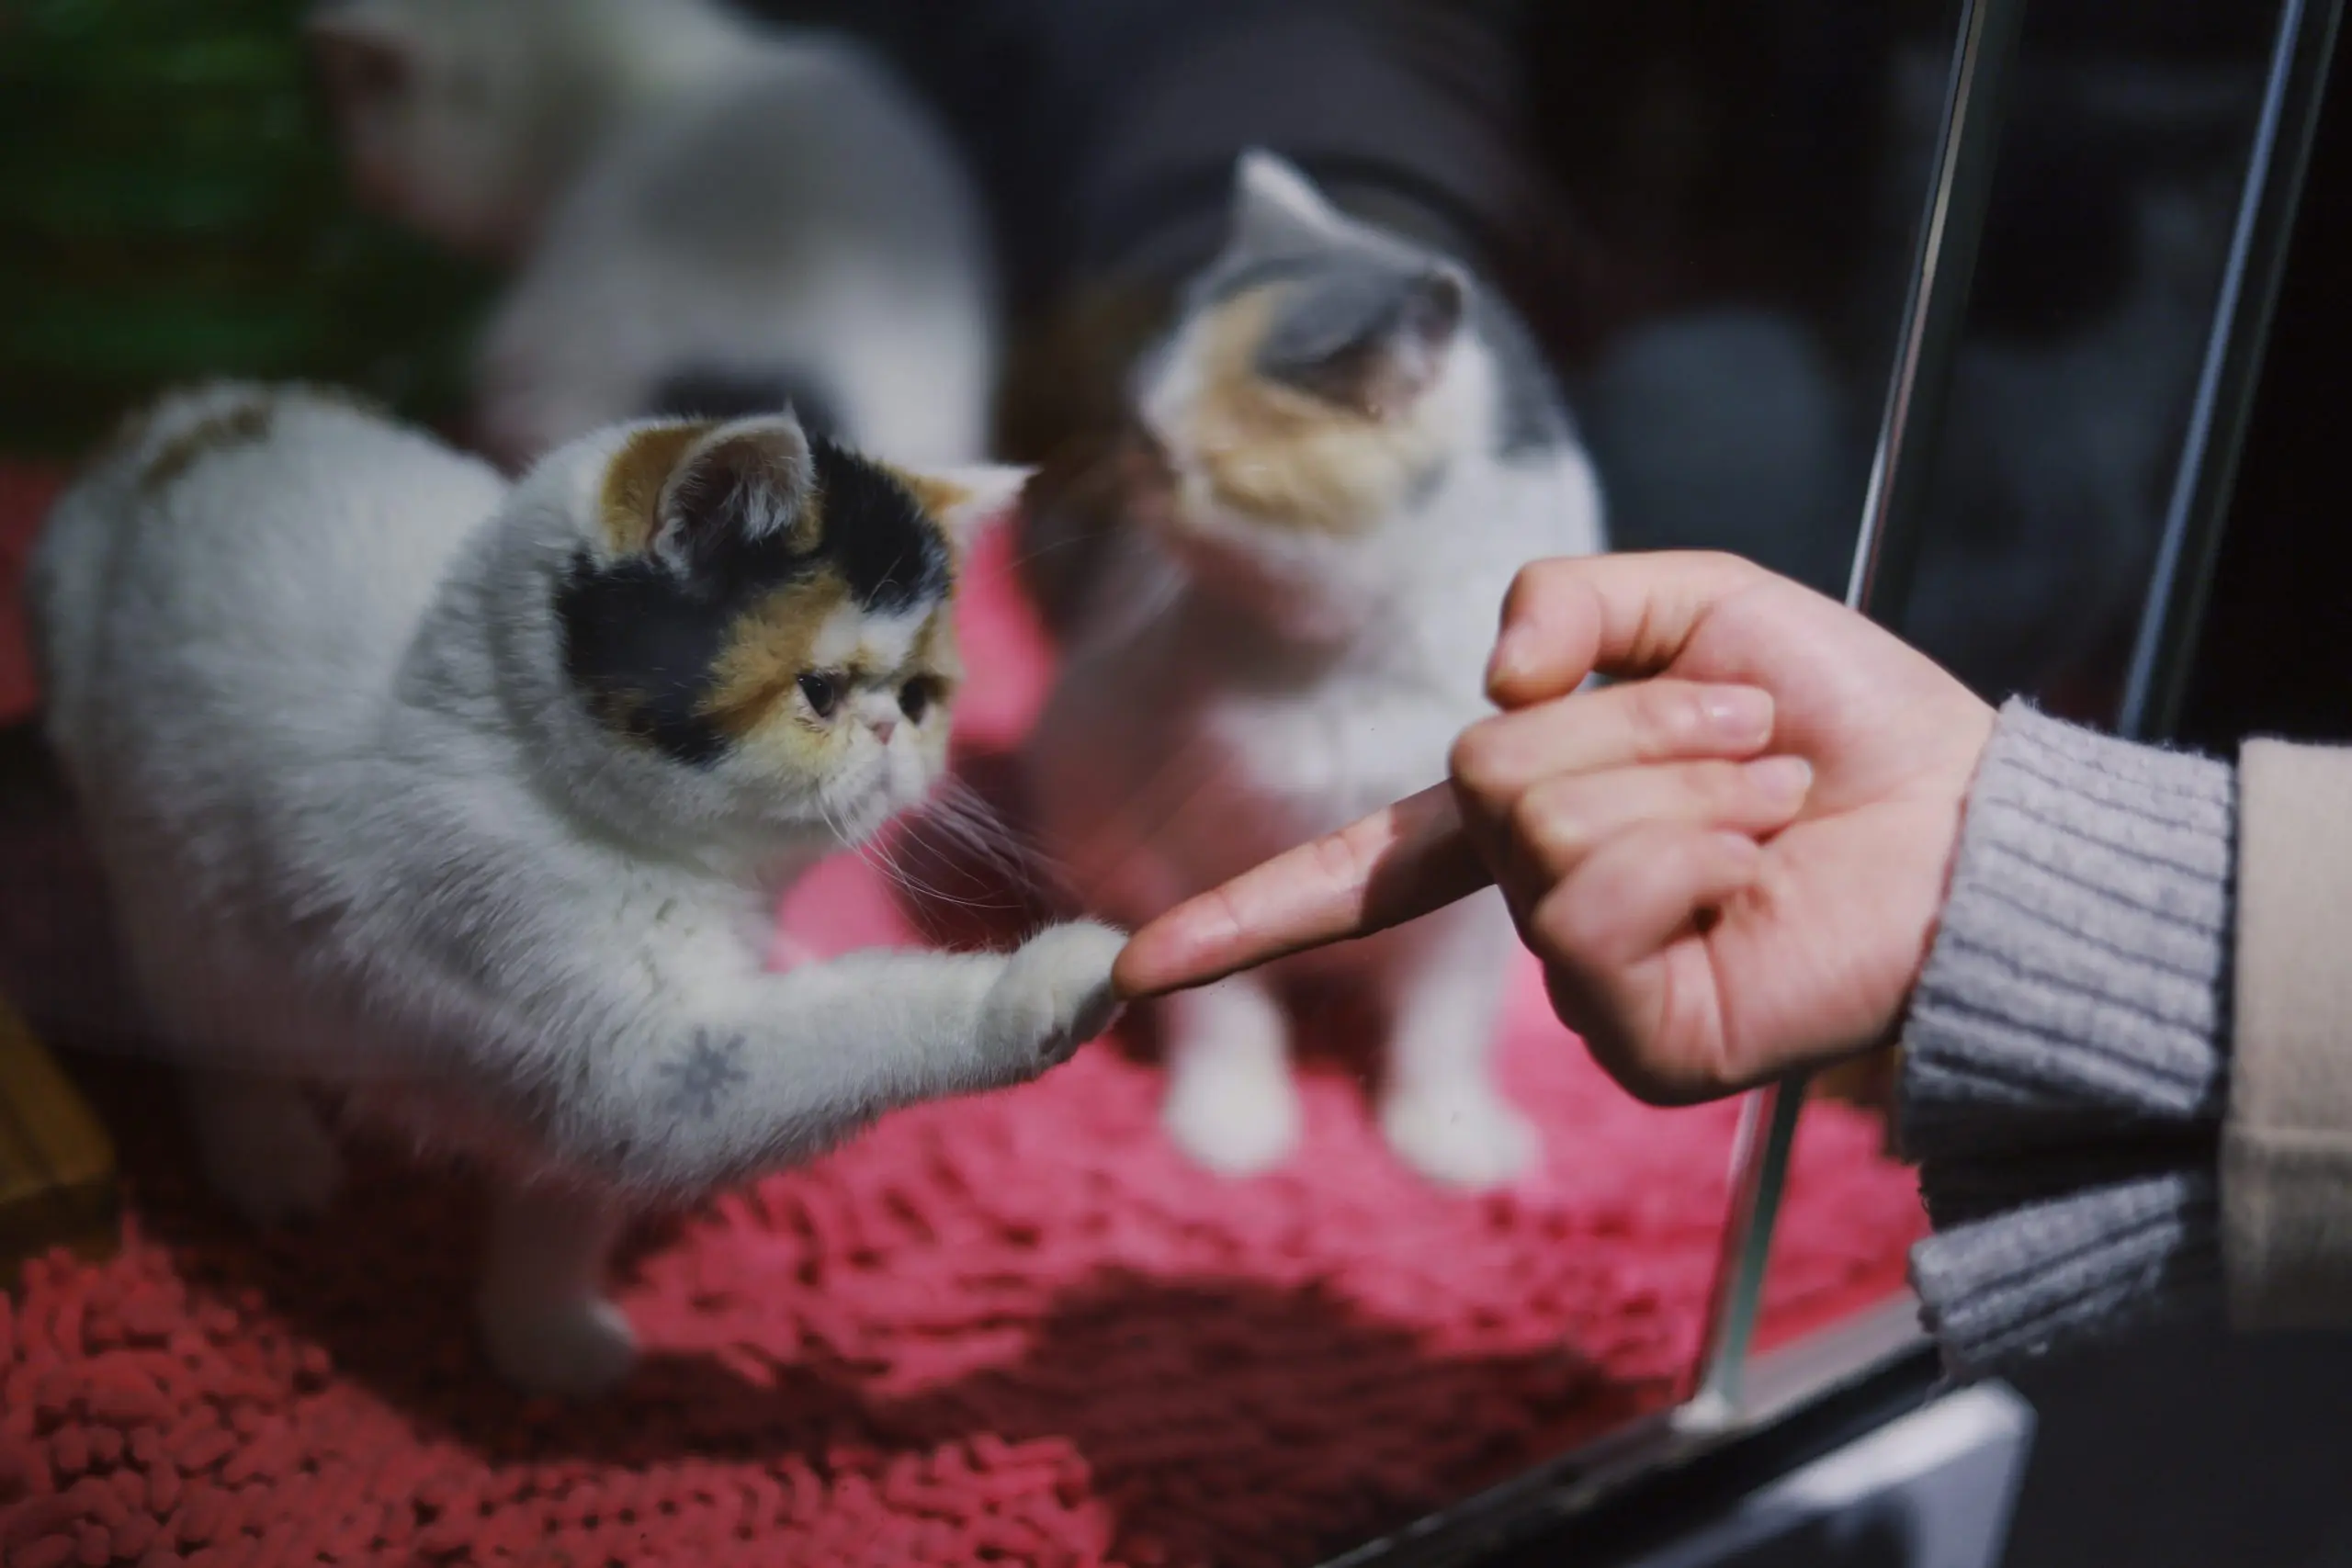 Two cats playing with person's hand.